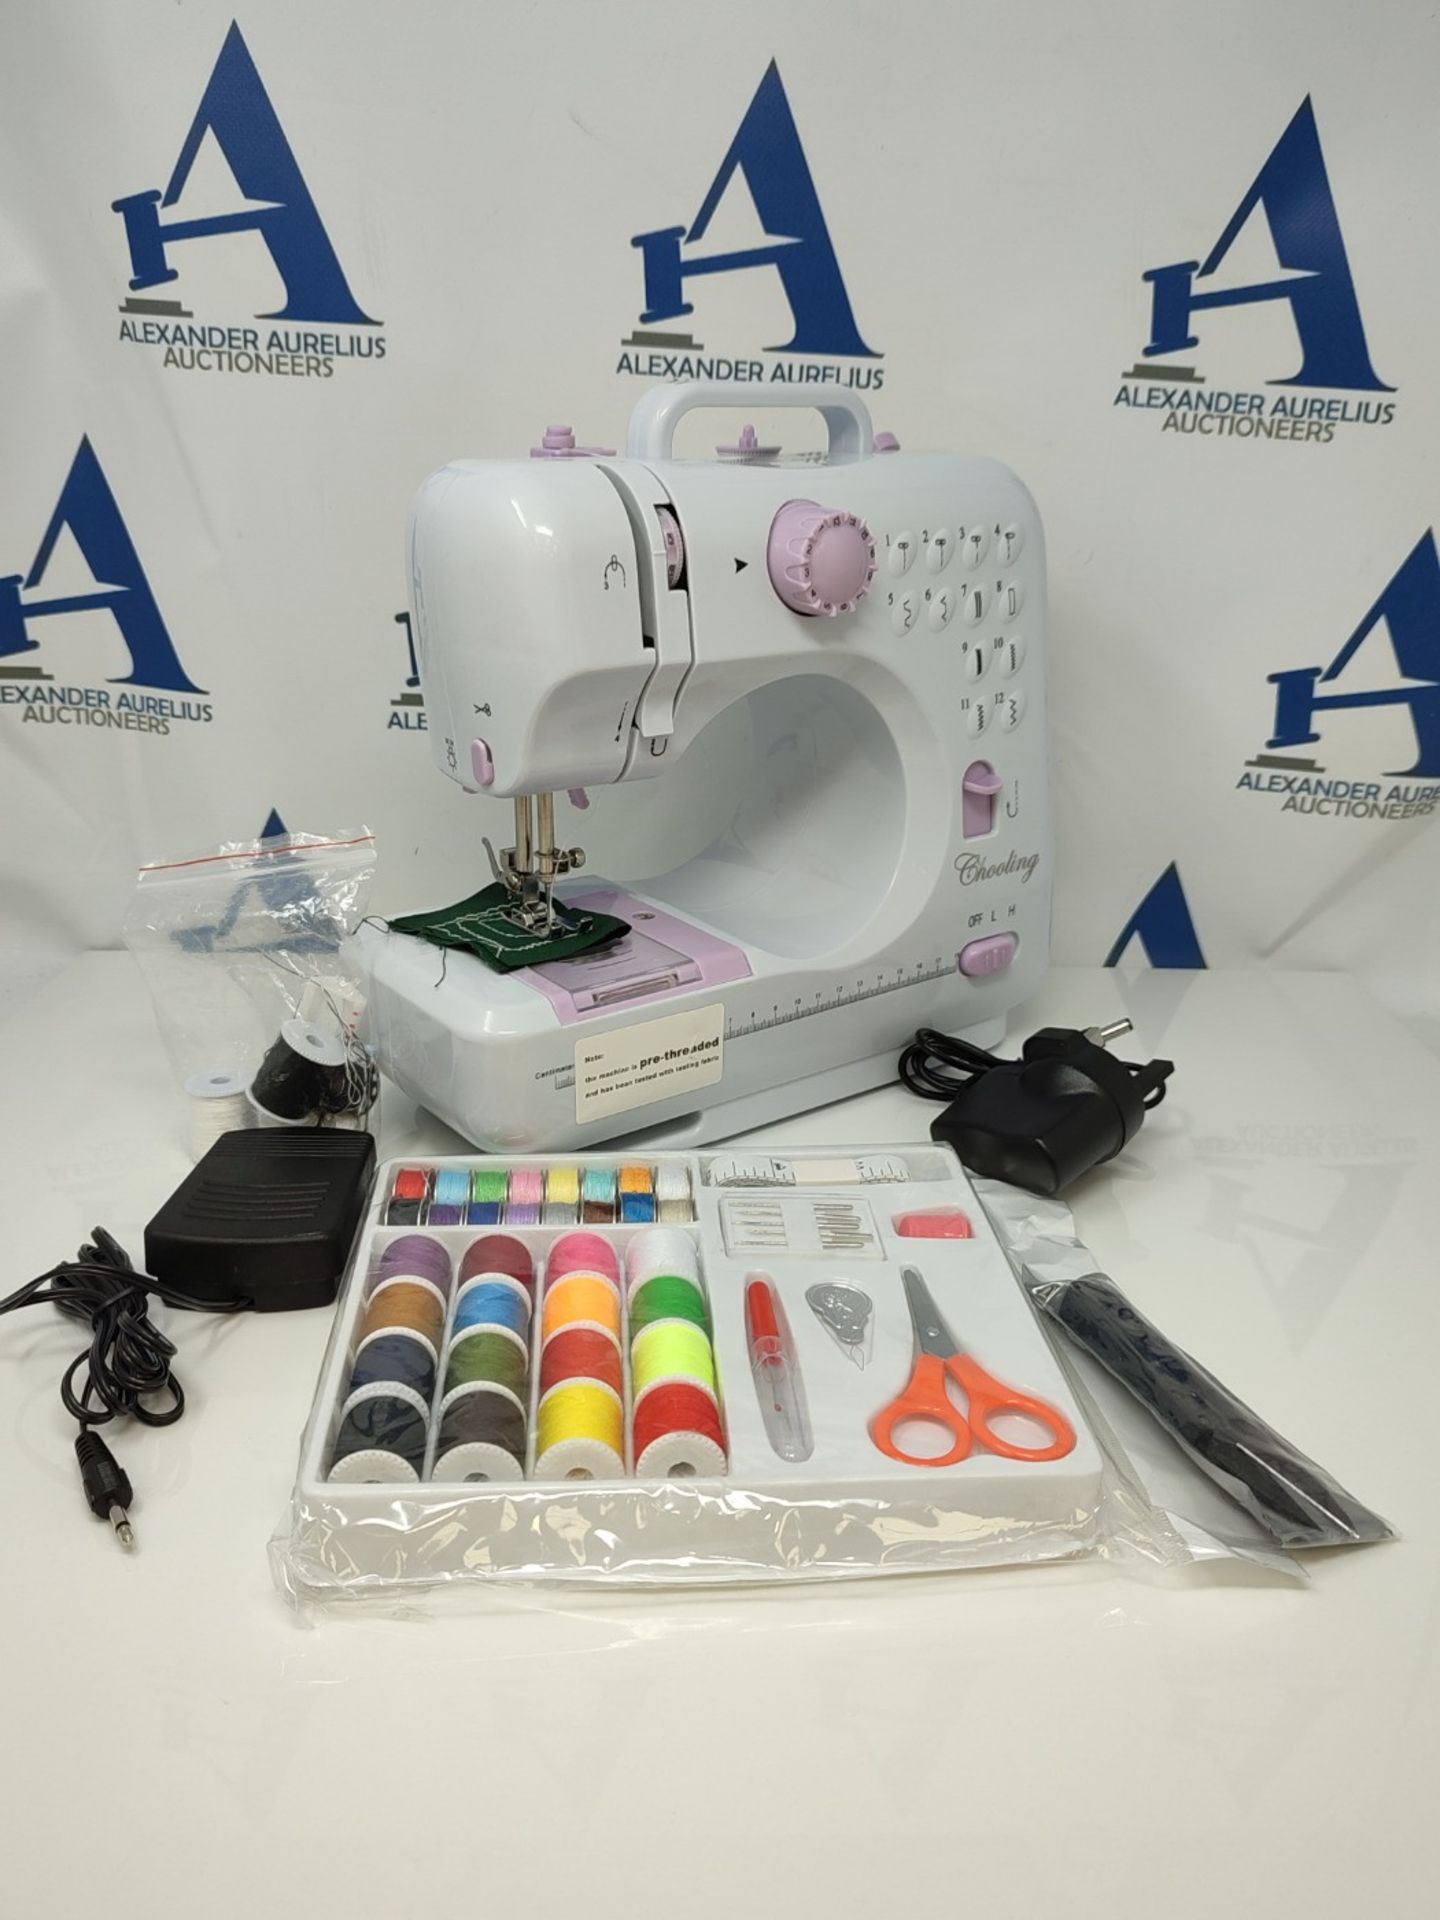 Mini Sewing Machine by chooling (Extension stand, Sewing Supplies set, Thread Snip inc - Image 3 of 3